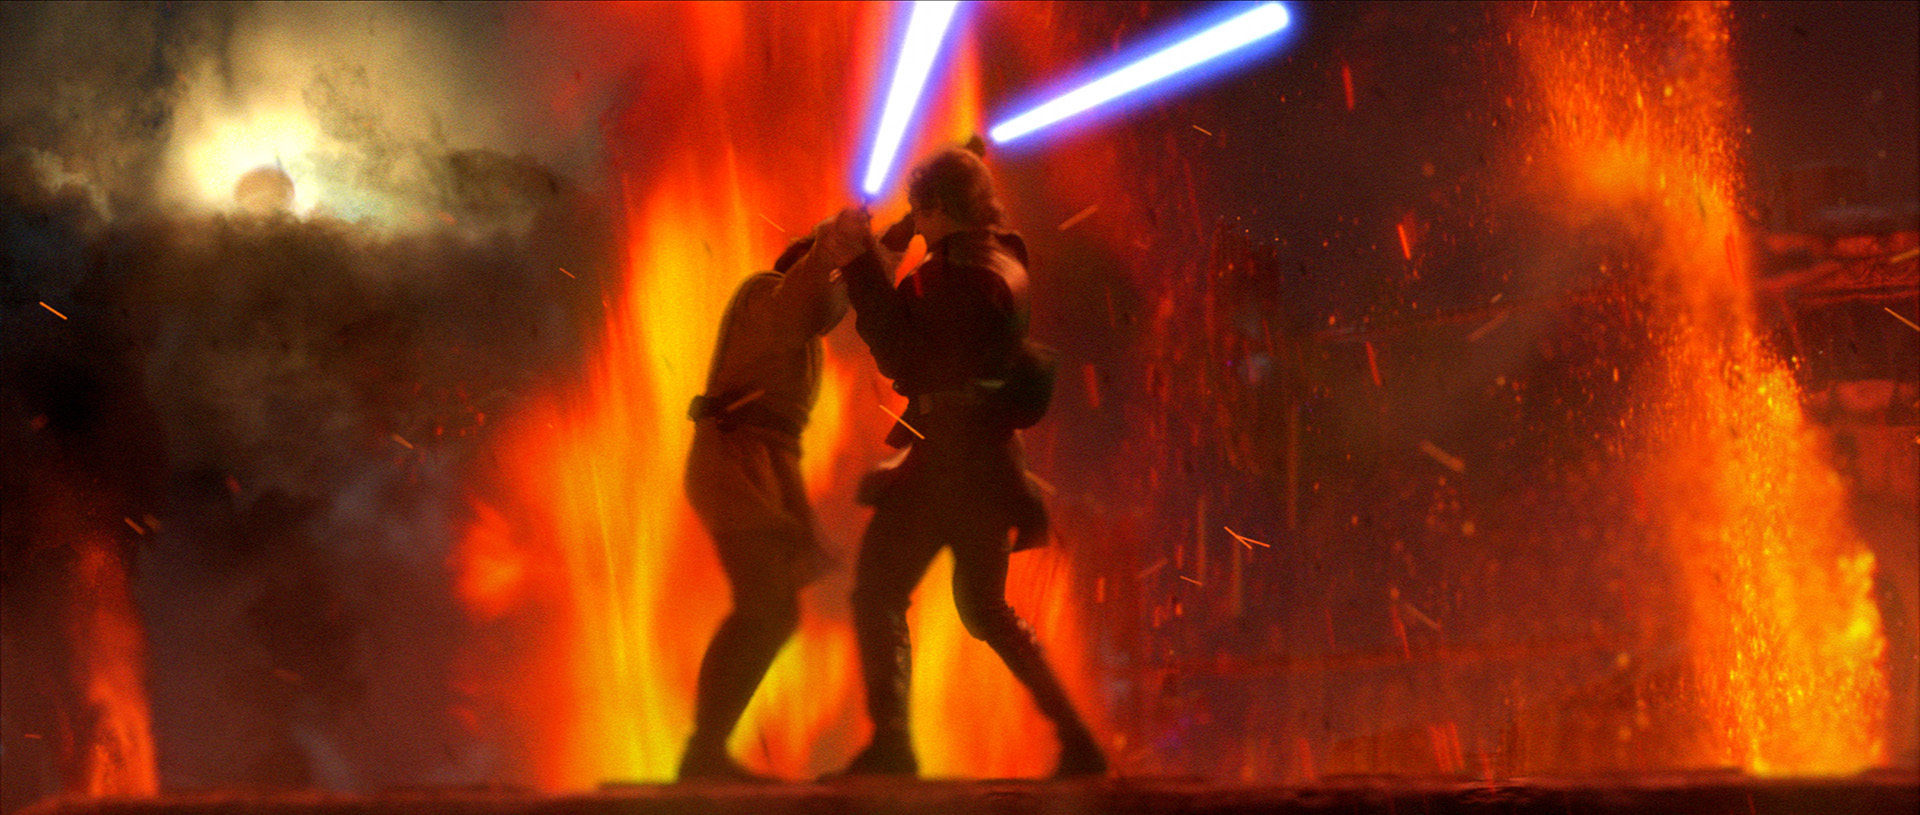 download the new Star Wars Ep. III: Revenge of the Sith